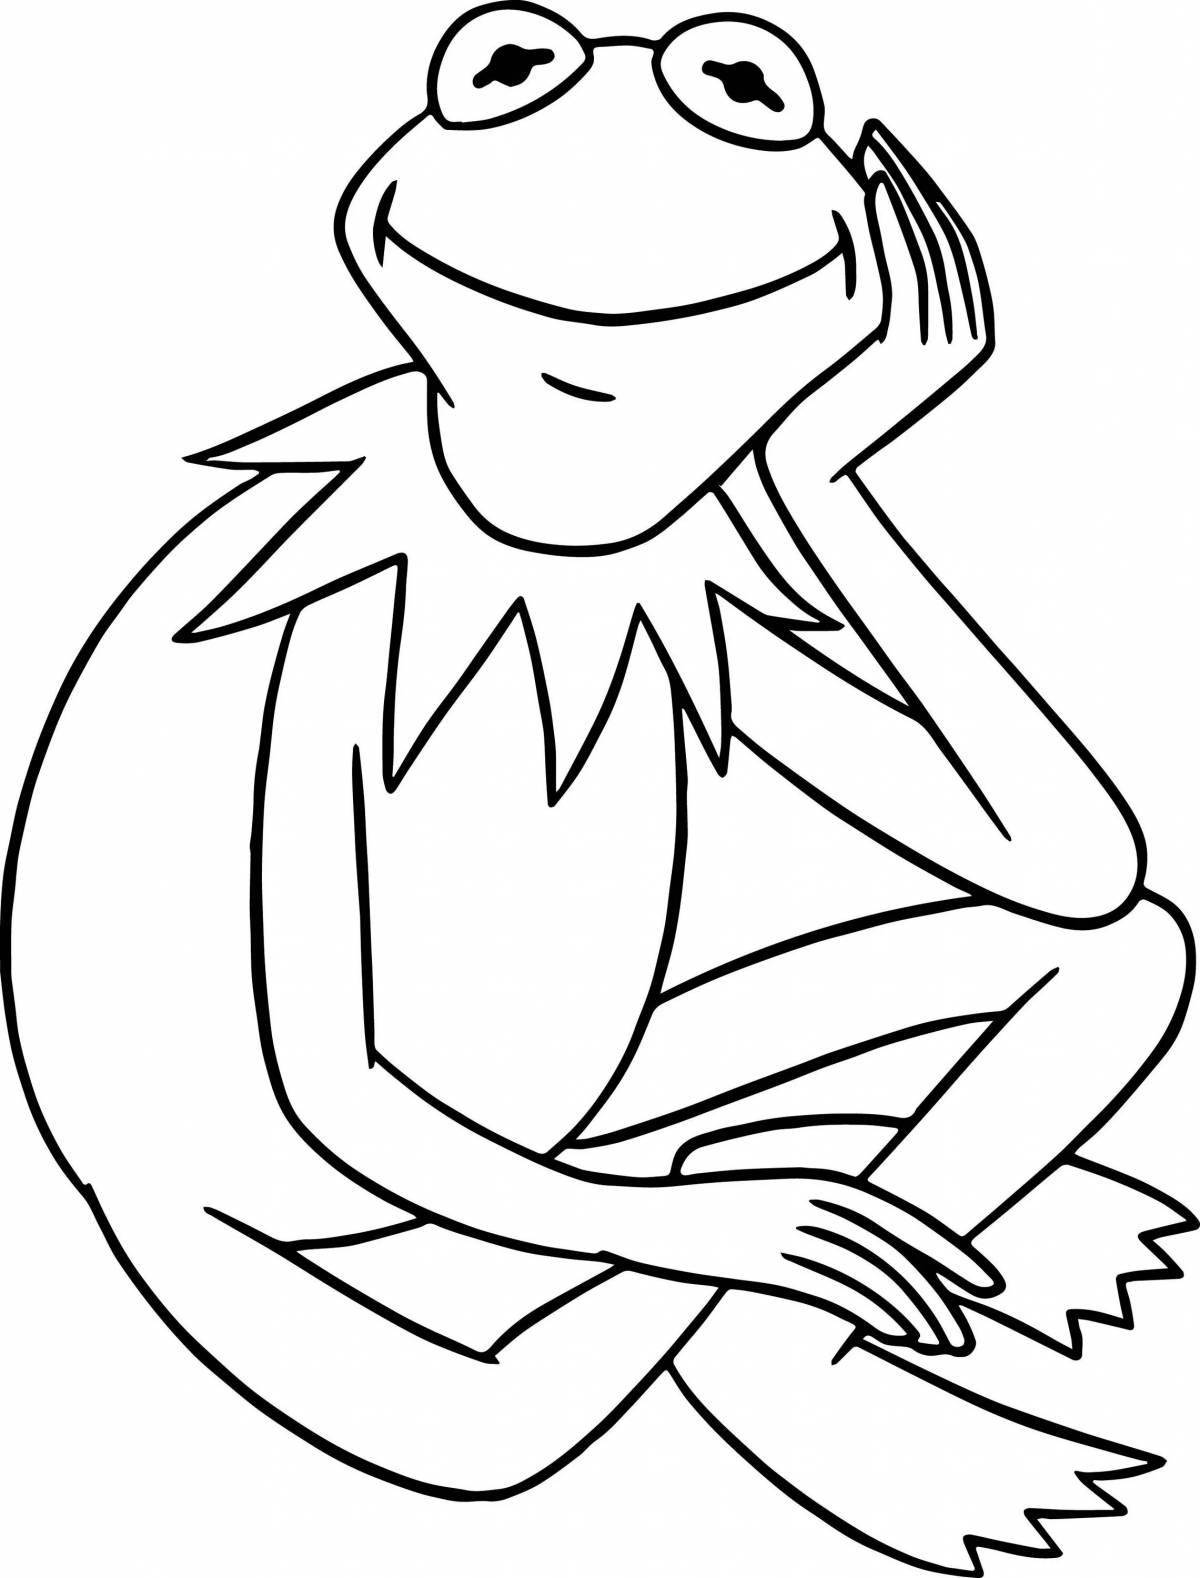 Adorable frog meme coloring page